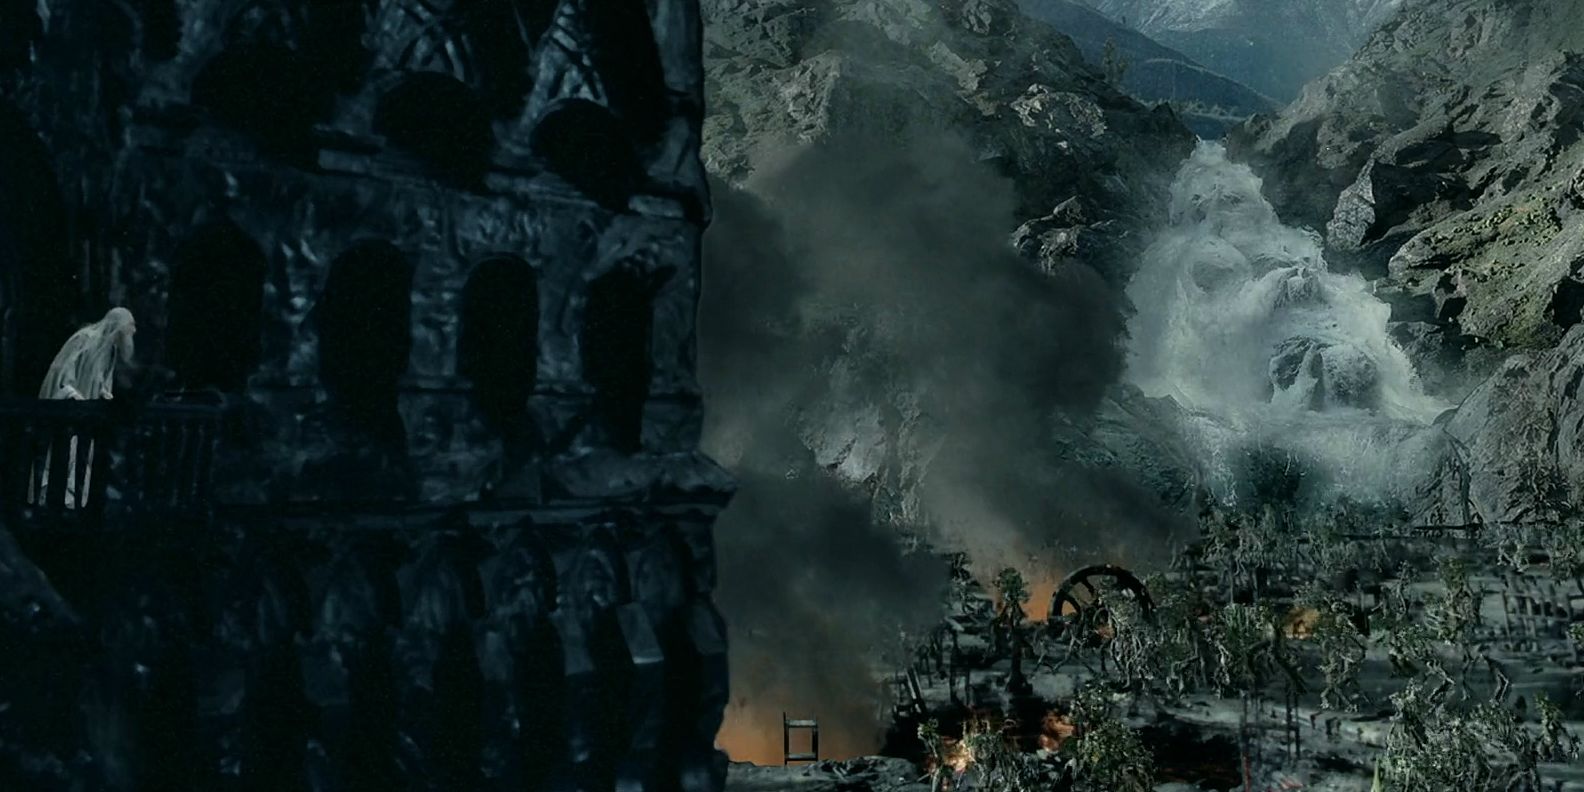 Ents flood Isengard in Two Towers